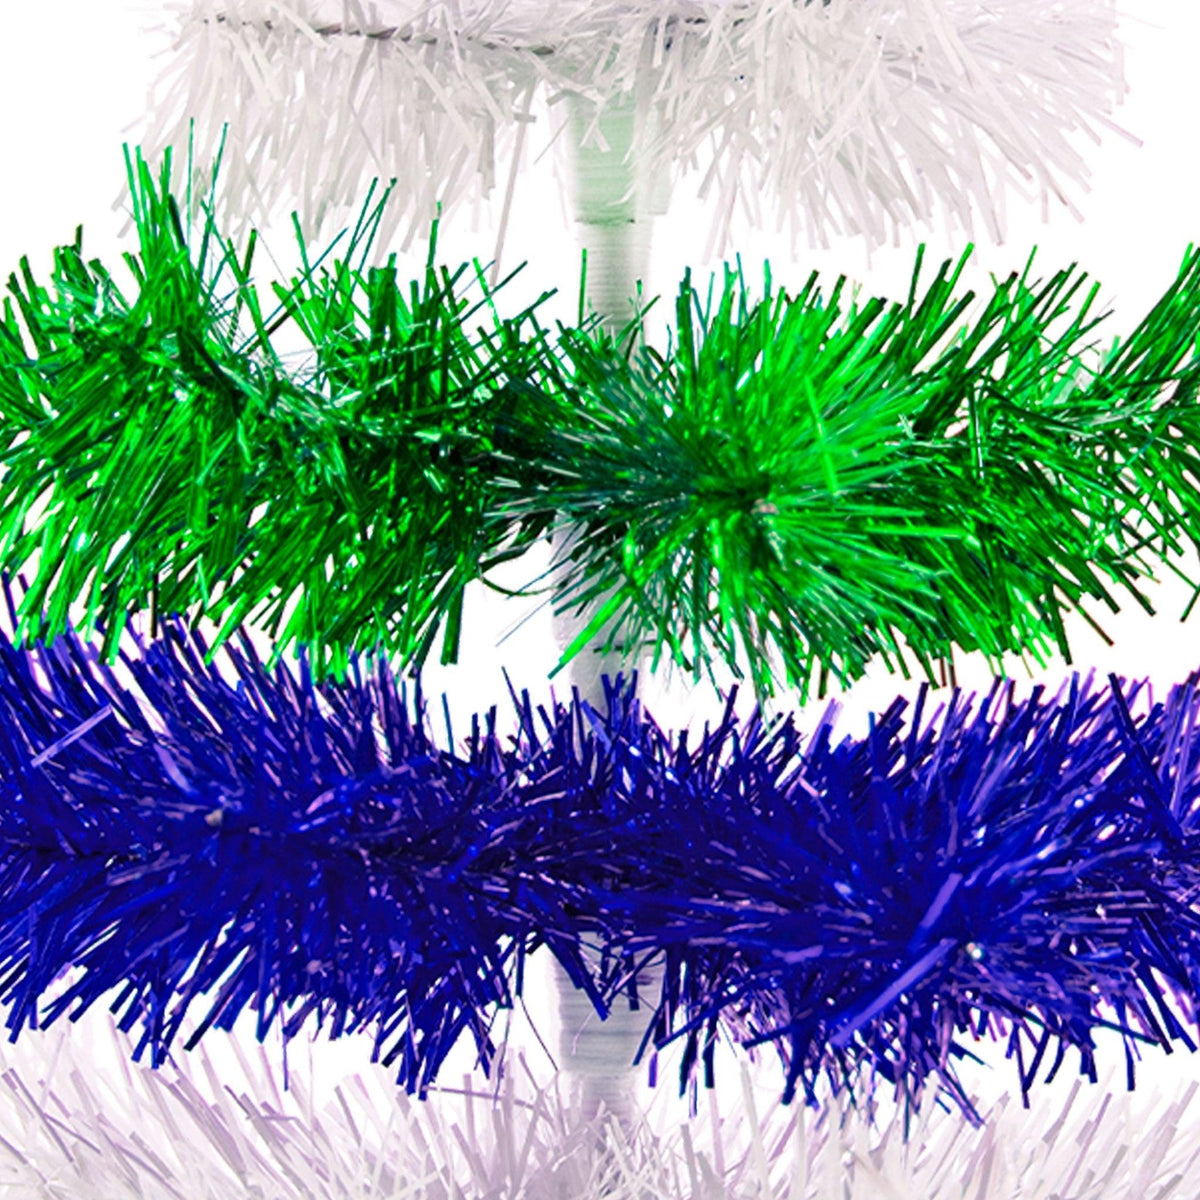 Blue, White, and Green Layered Tinsel Christmas Trees made by hand in the USA.    Decorate for the holidays with retro Earth Day-themed Trees and start creating your centerpiece on sale at leedisplay.com